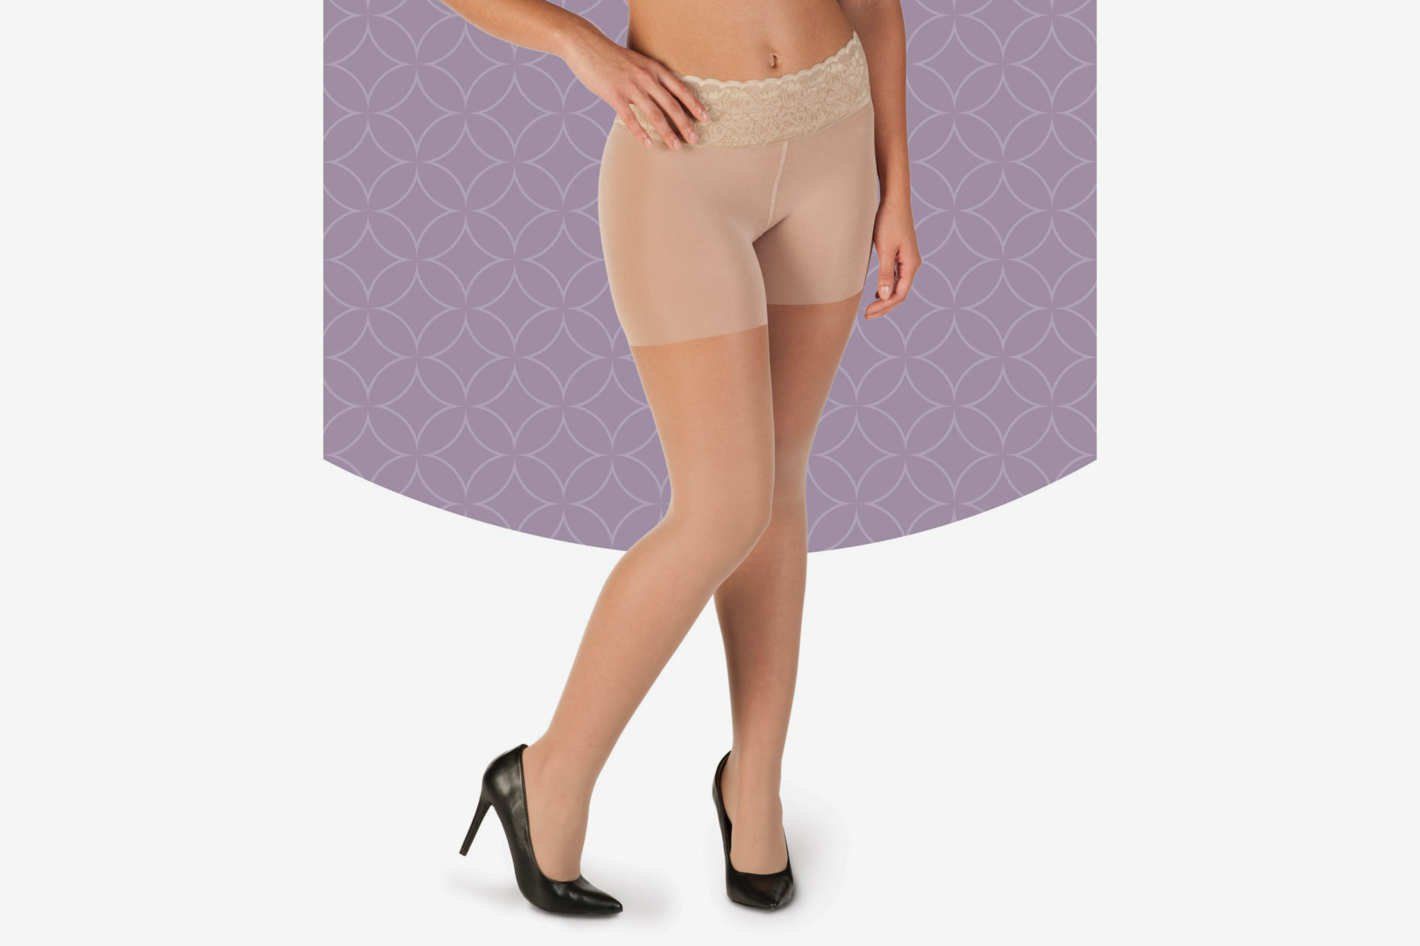 Pantyhose with tiny panty liner